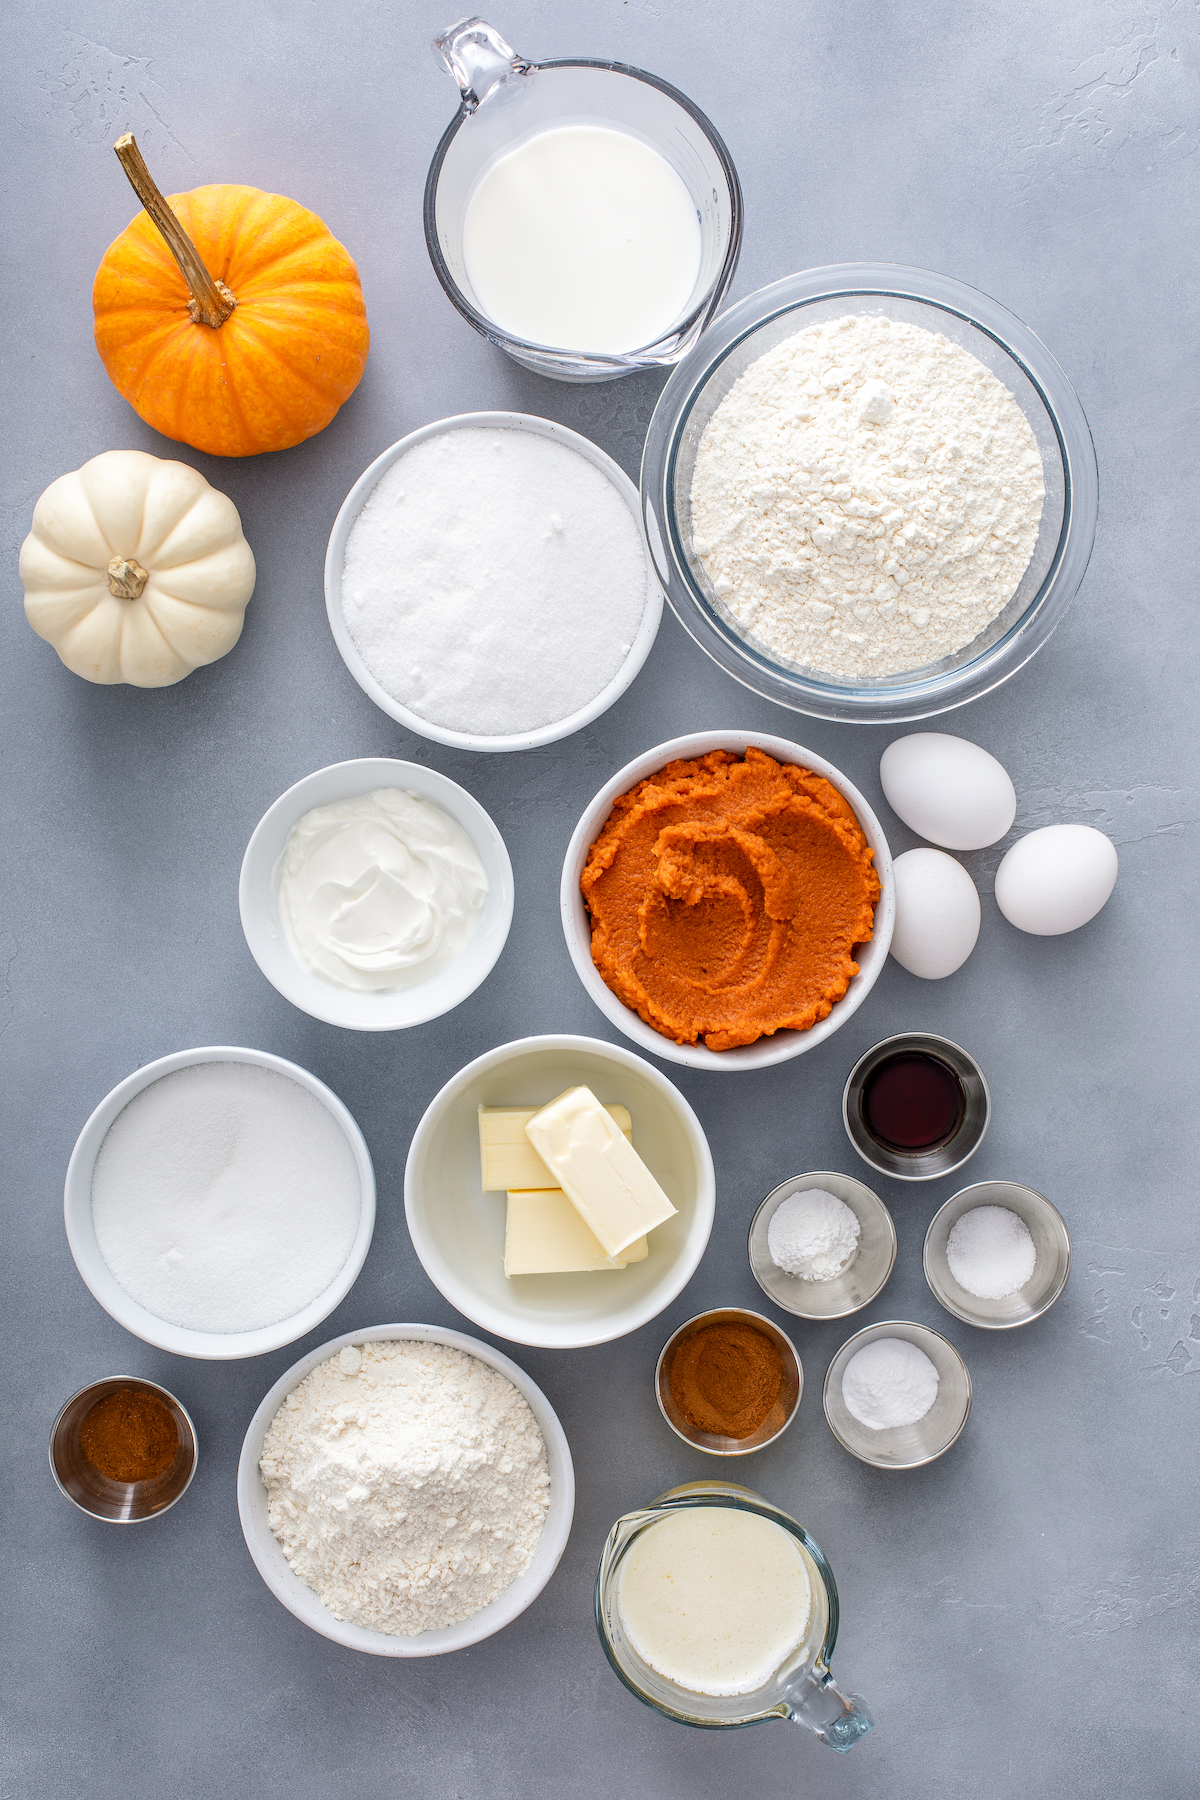 Ingredients for pumpkin coffee cake, arranged on a work surface.